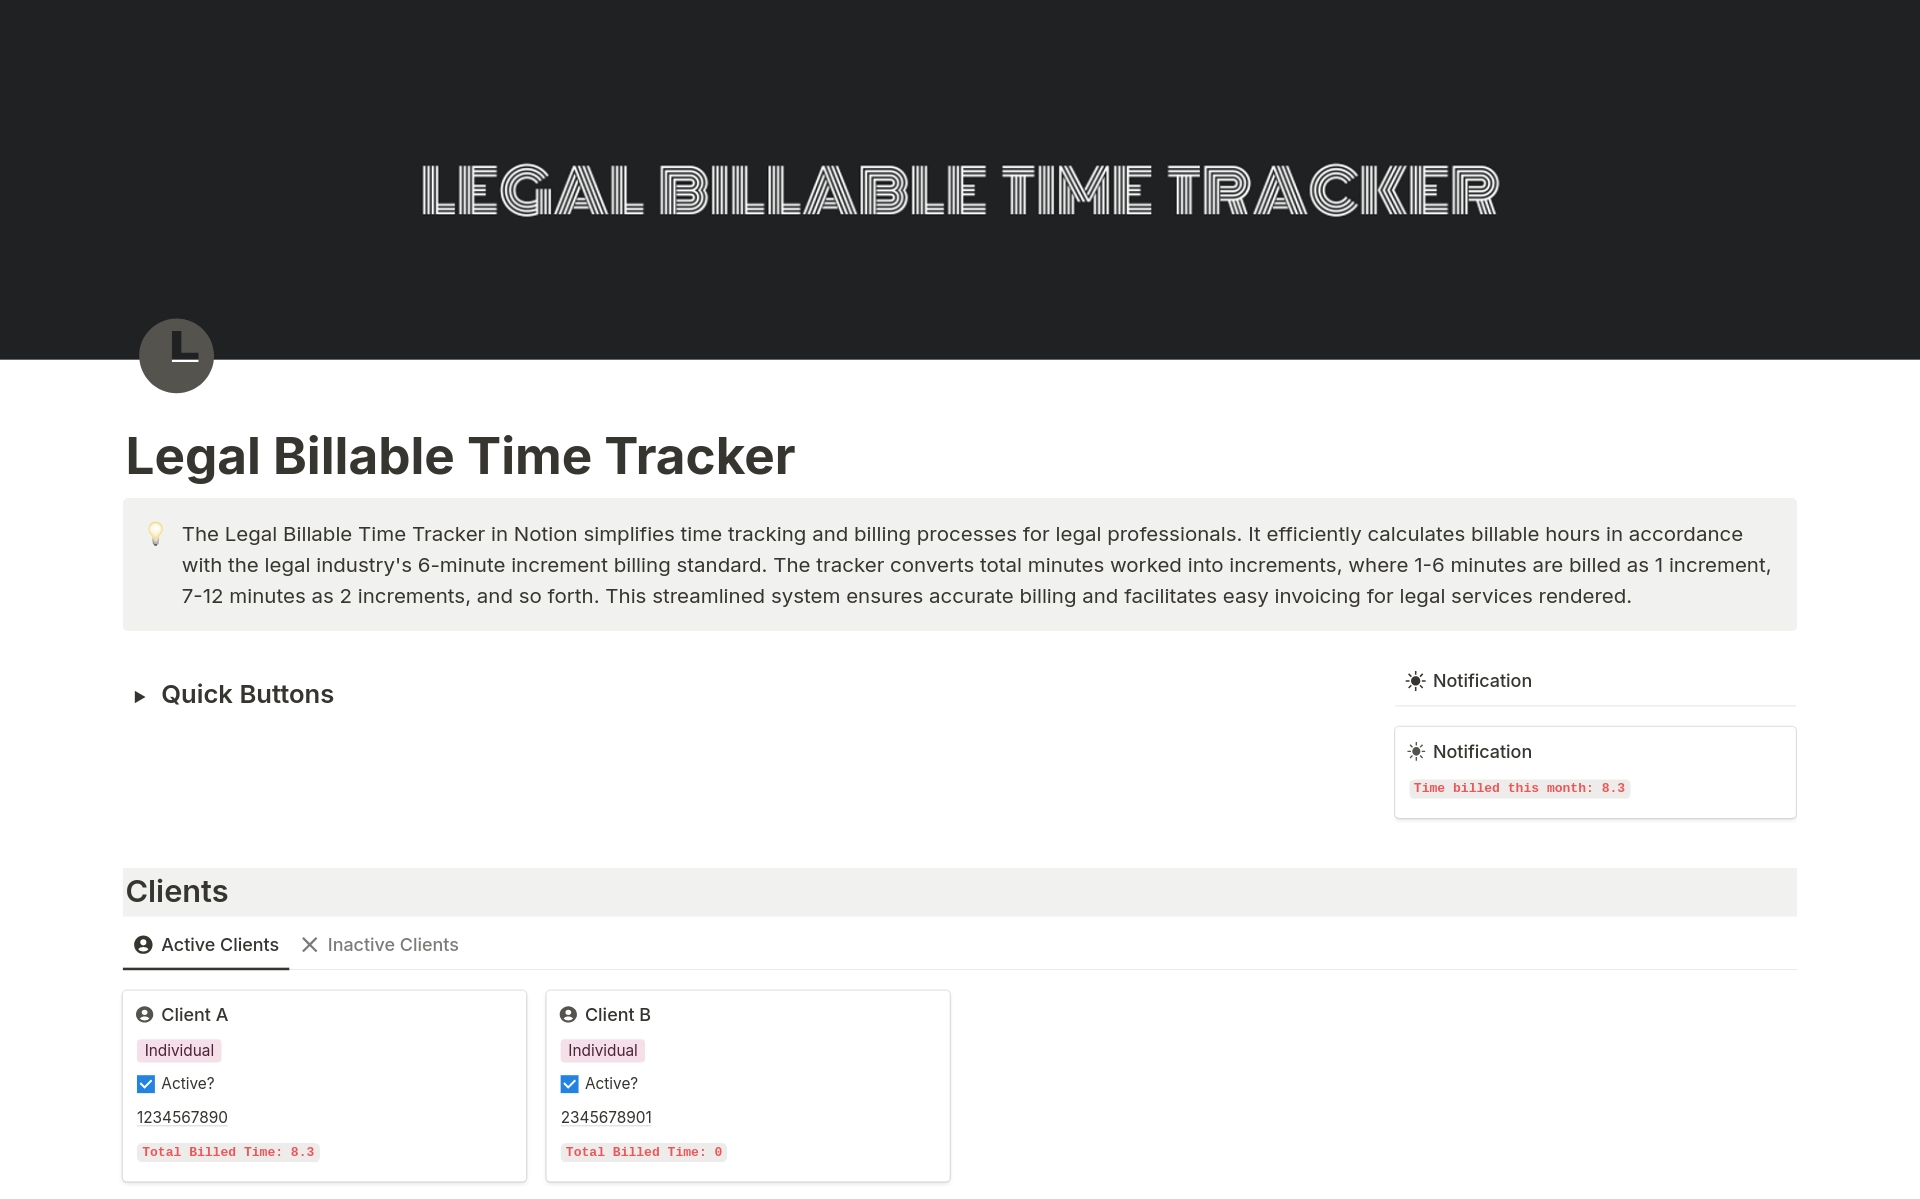 The Legal Billable Time Tracker in Notion simplifies time tracking and billing processes for legal professionals. It efficiently calculates billable hours in accordance with the legal industry's 6-minute increment billing standard.